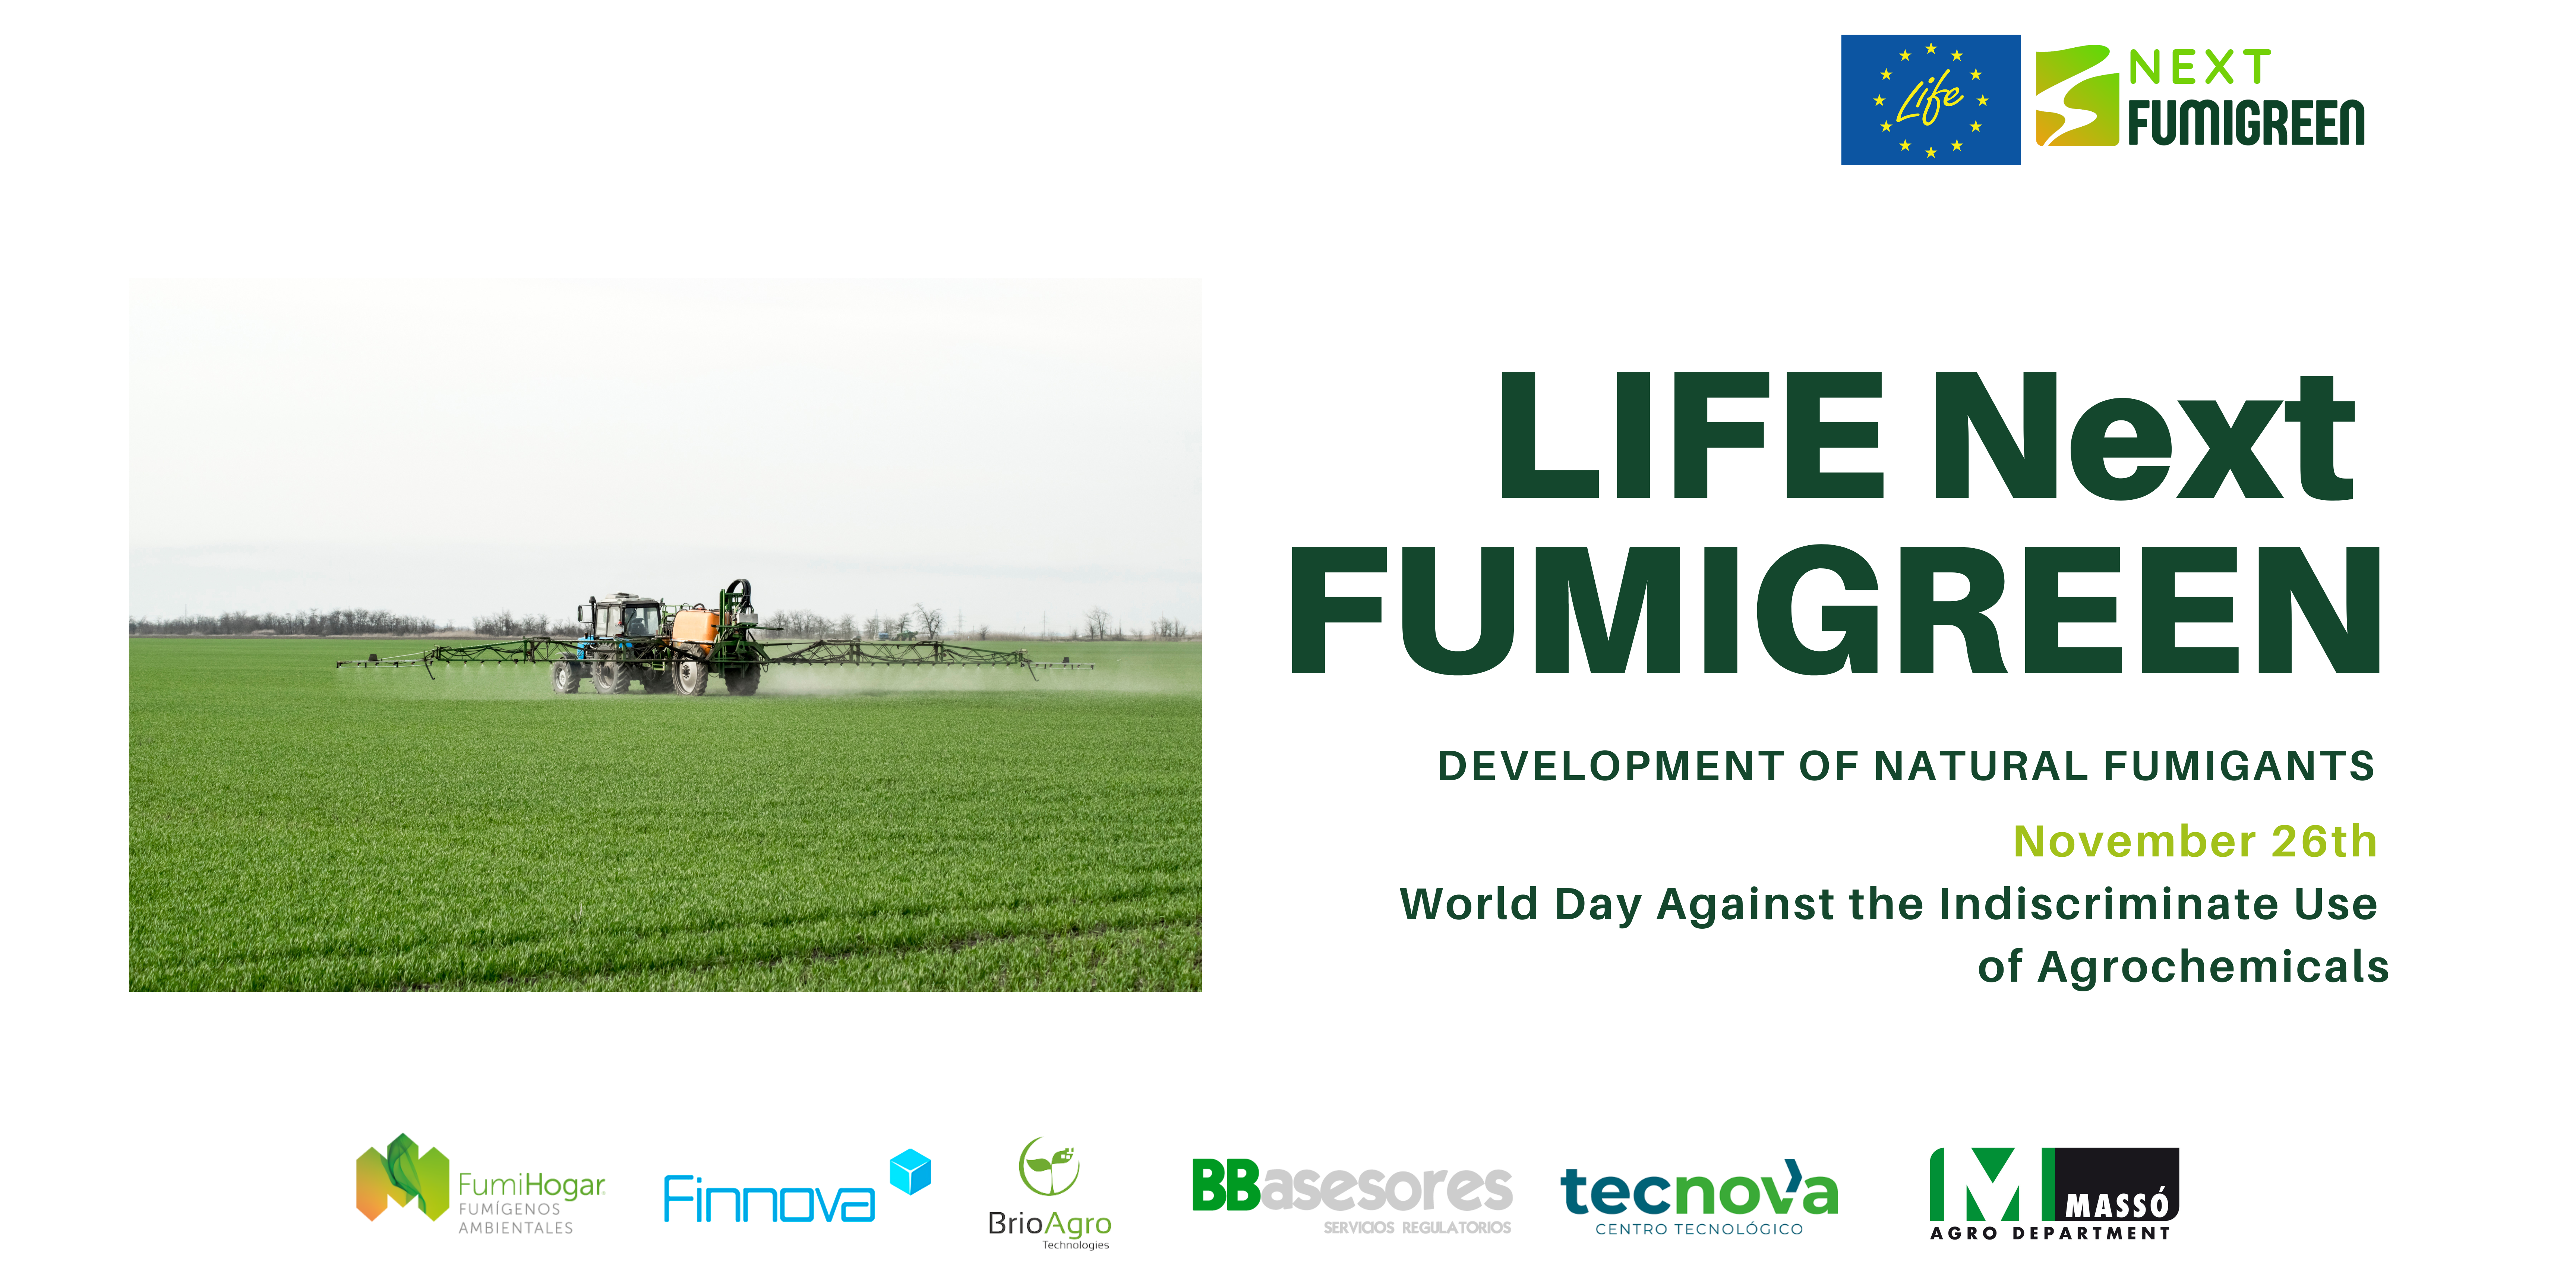 LIFE NextFUMIGREEN’s natural fumigants contribute to the fight against the indiscriminate use of agrochemicals